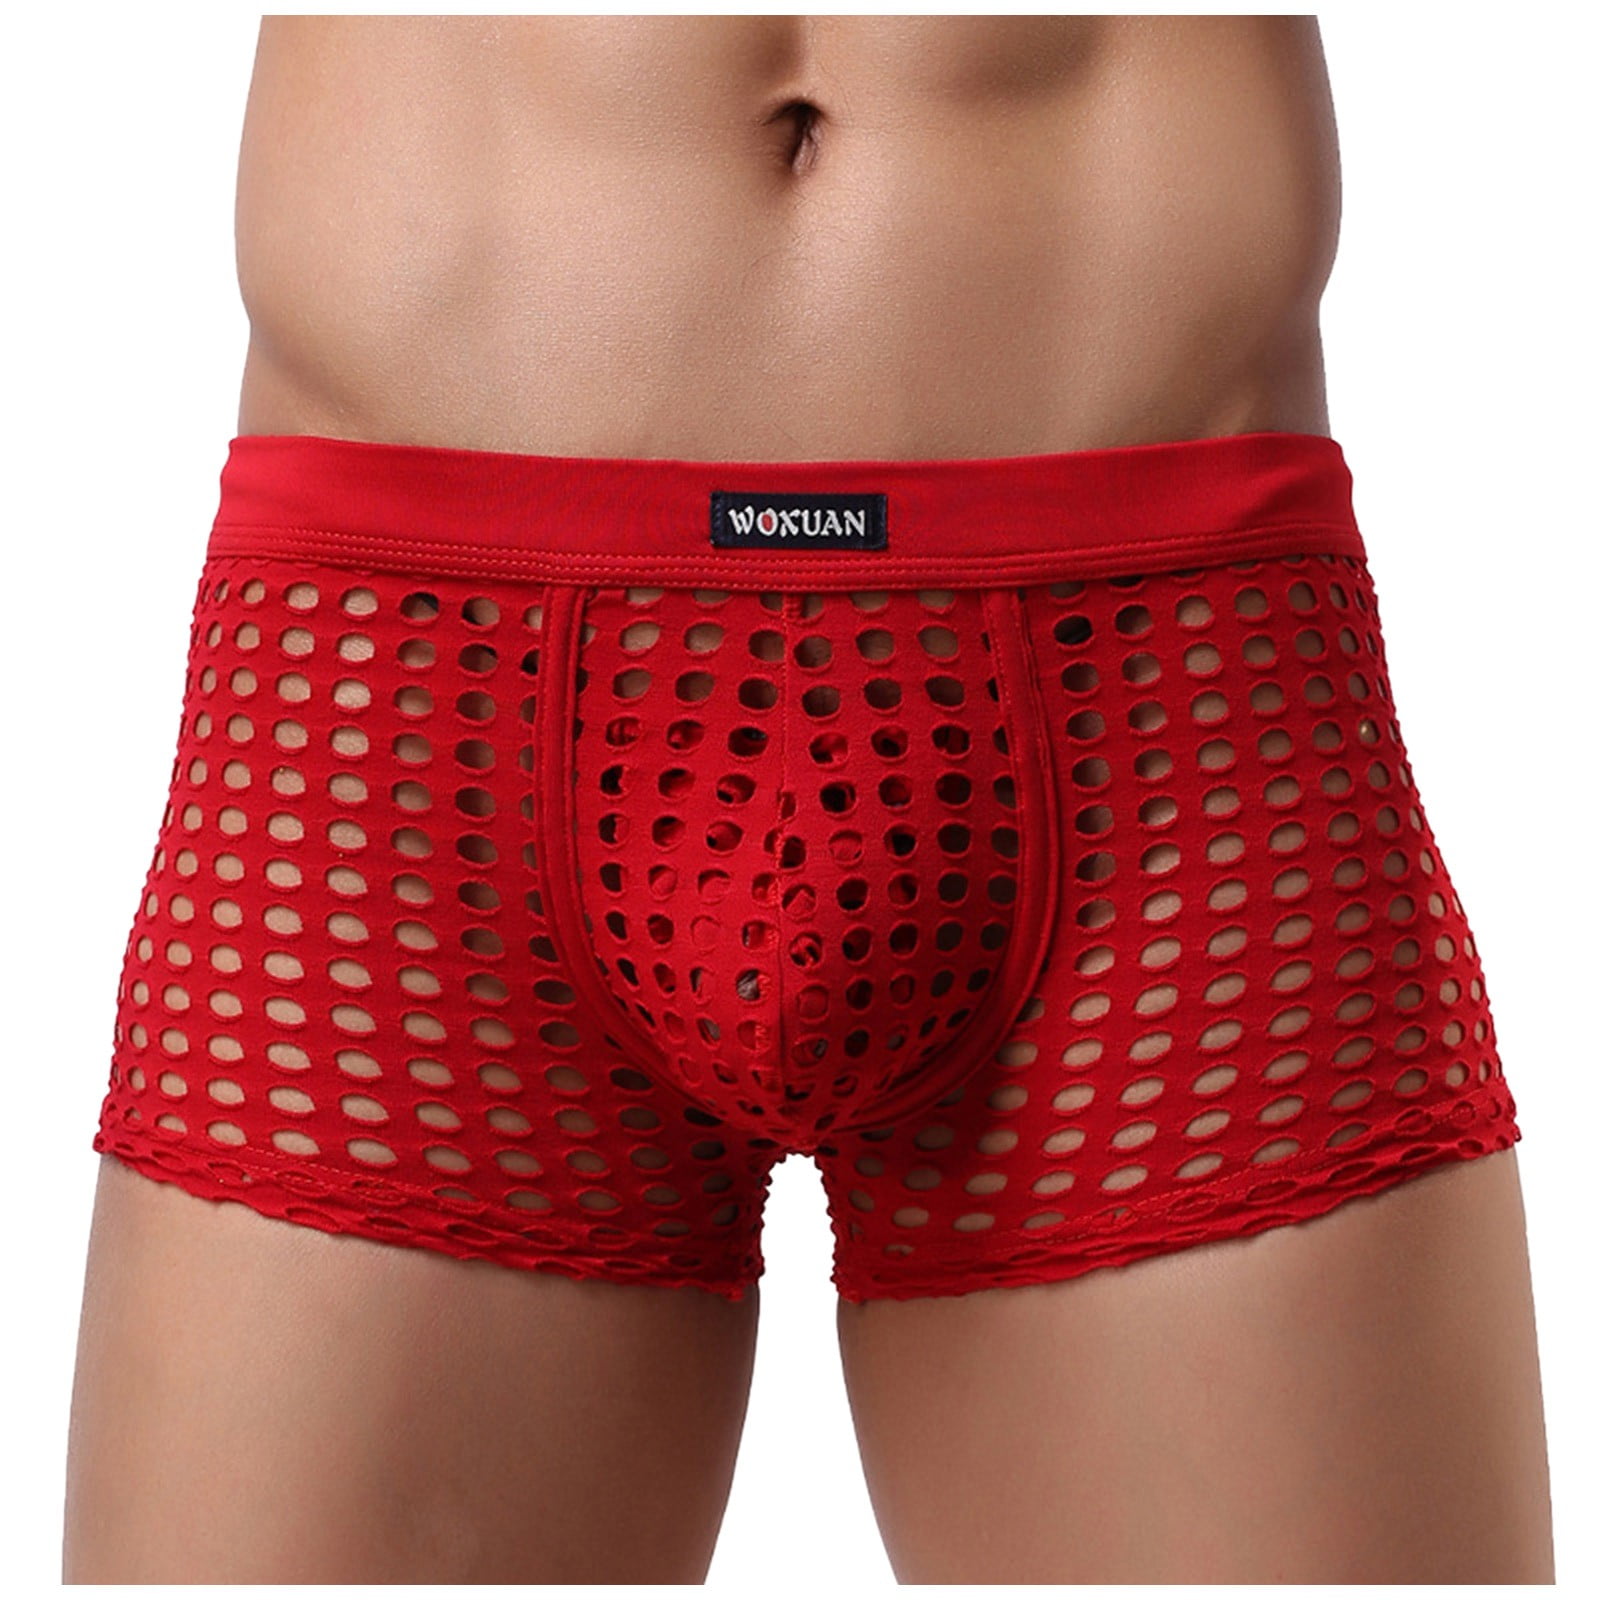 OVTICZA Sexy Underwear for Men Ruffle Hollow Out Pouch Sexy Boxer Briefs,3  Pack Red XL